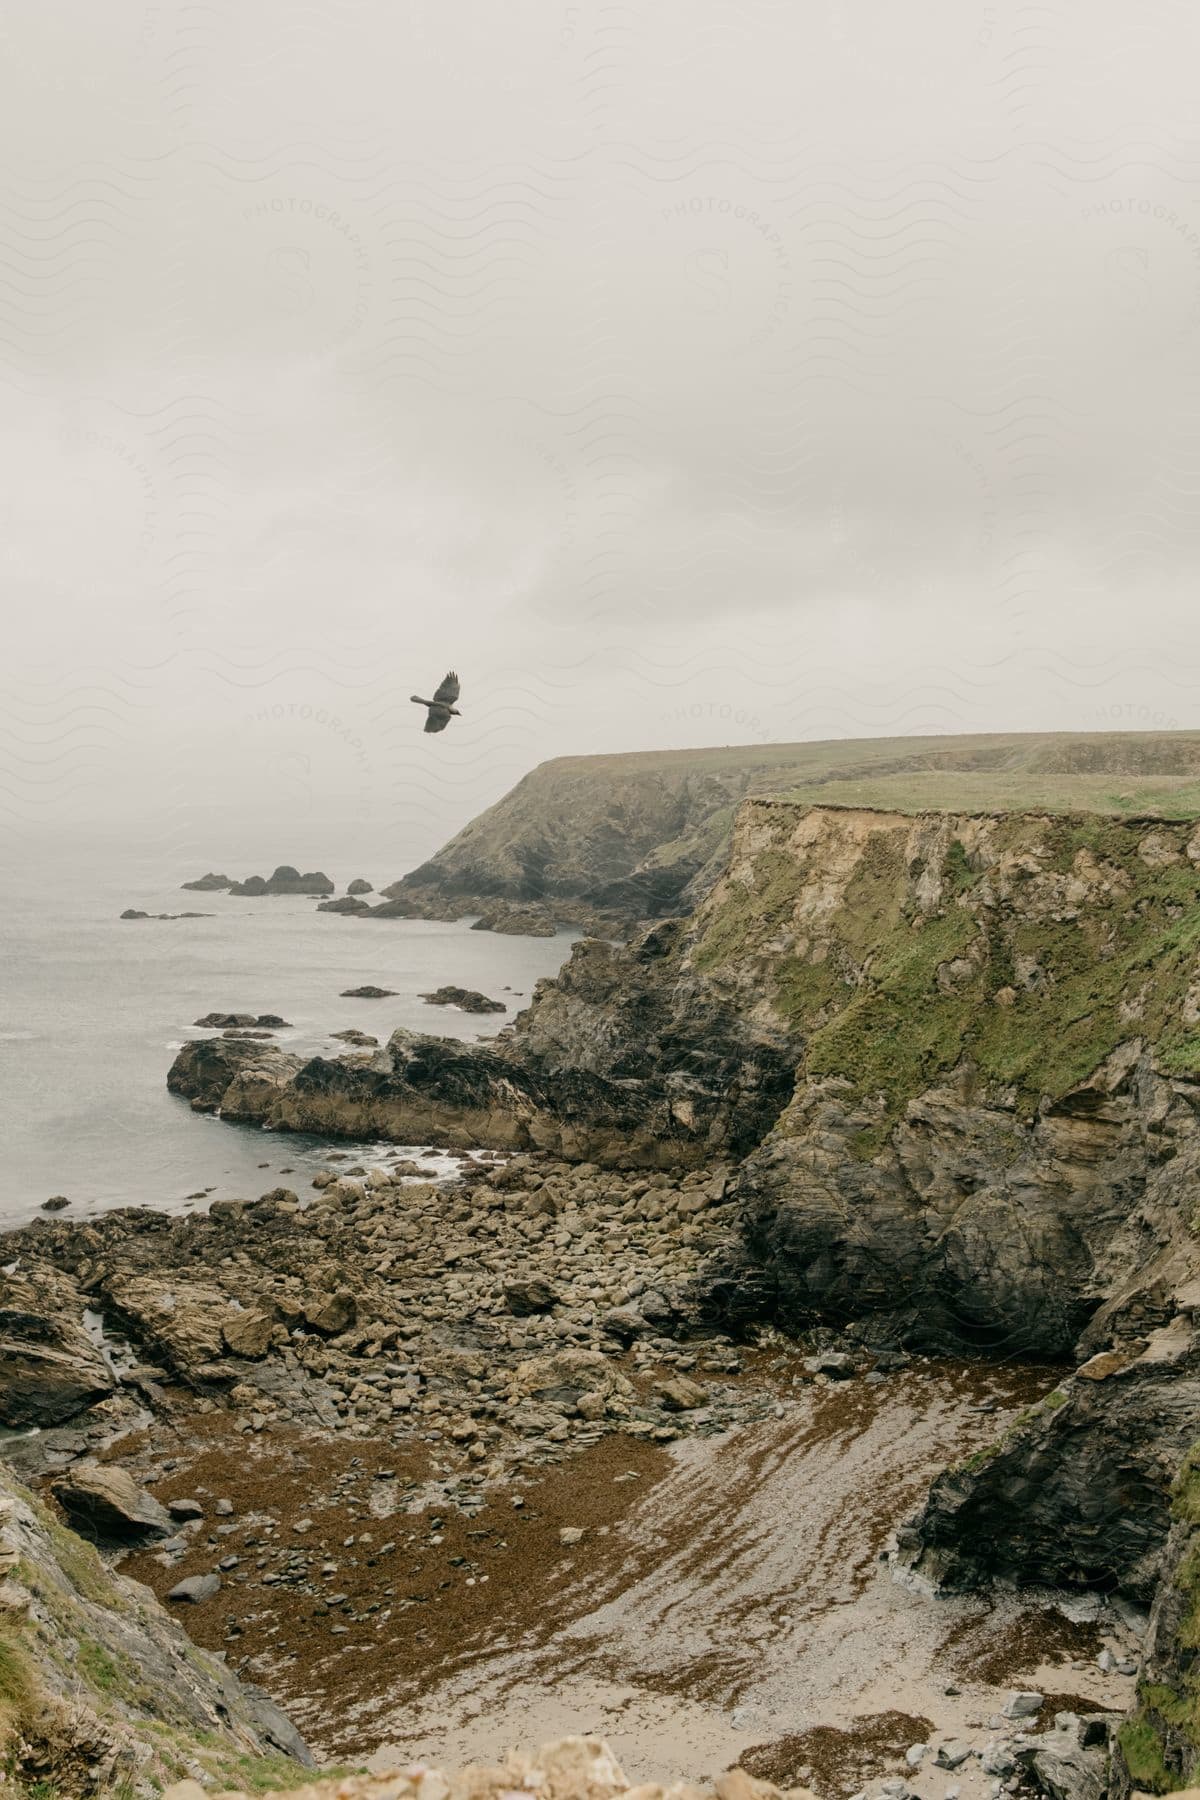 A serene coastal landscape with a bird flying over the water and rocky cliffs